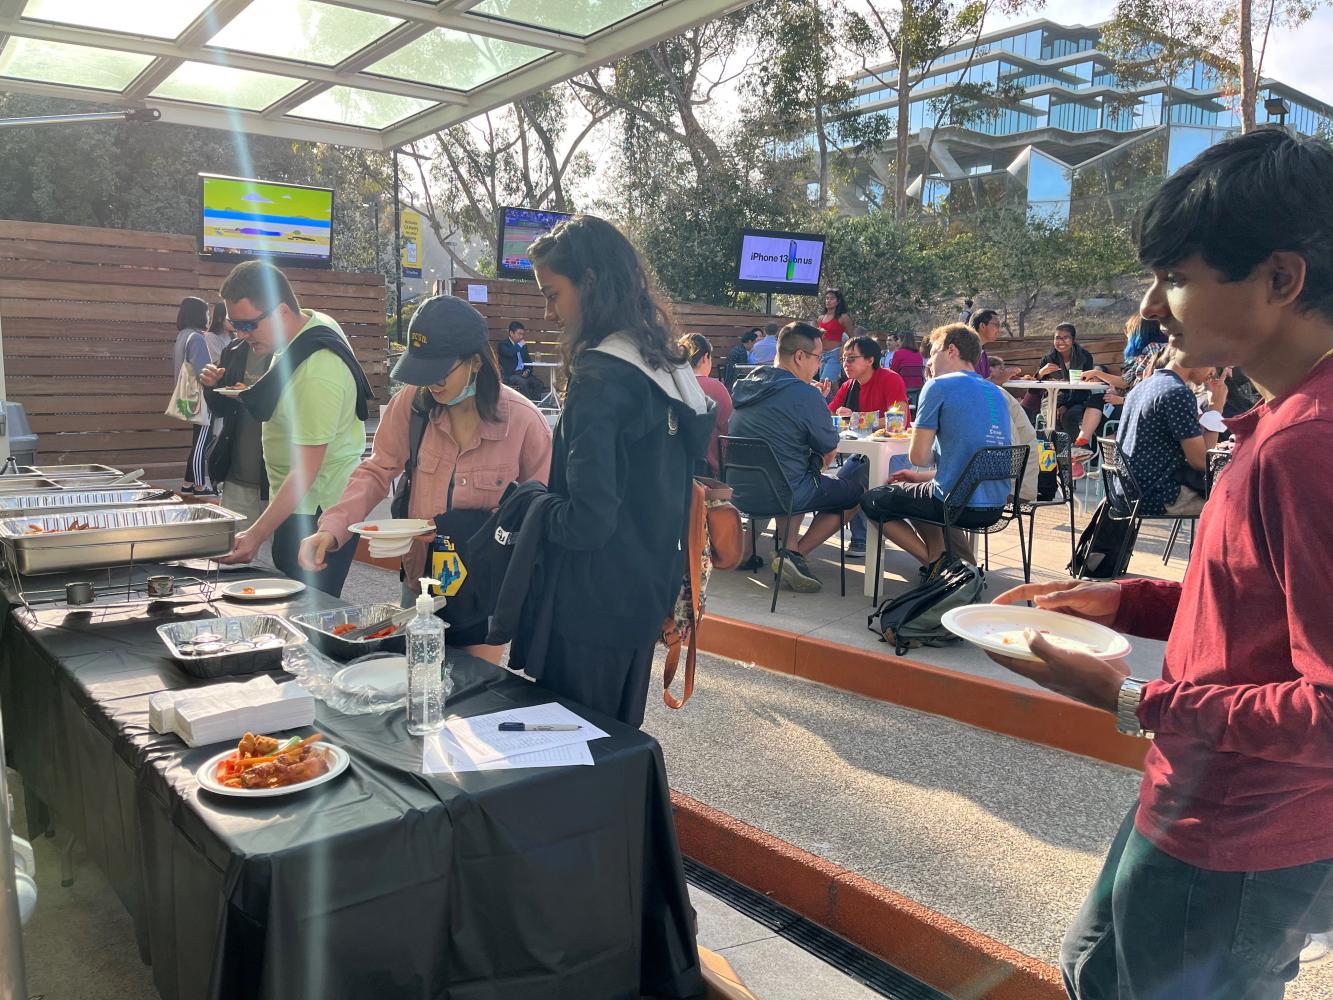 Picture of the RoboGrads end of the year social with people serving themselves food. There are also groups of people eating and talking at tables, and Geisel Library is in the background.